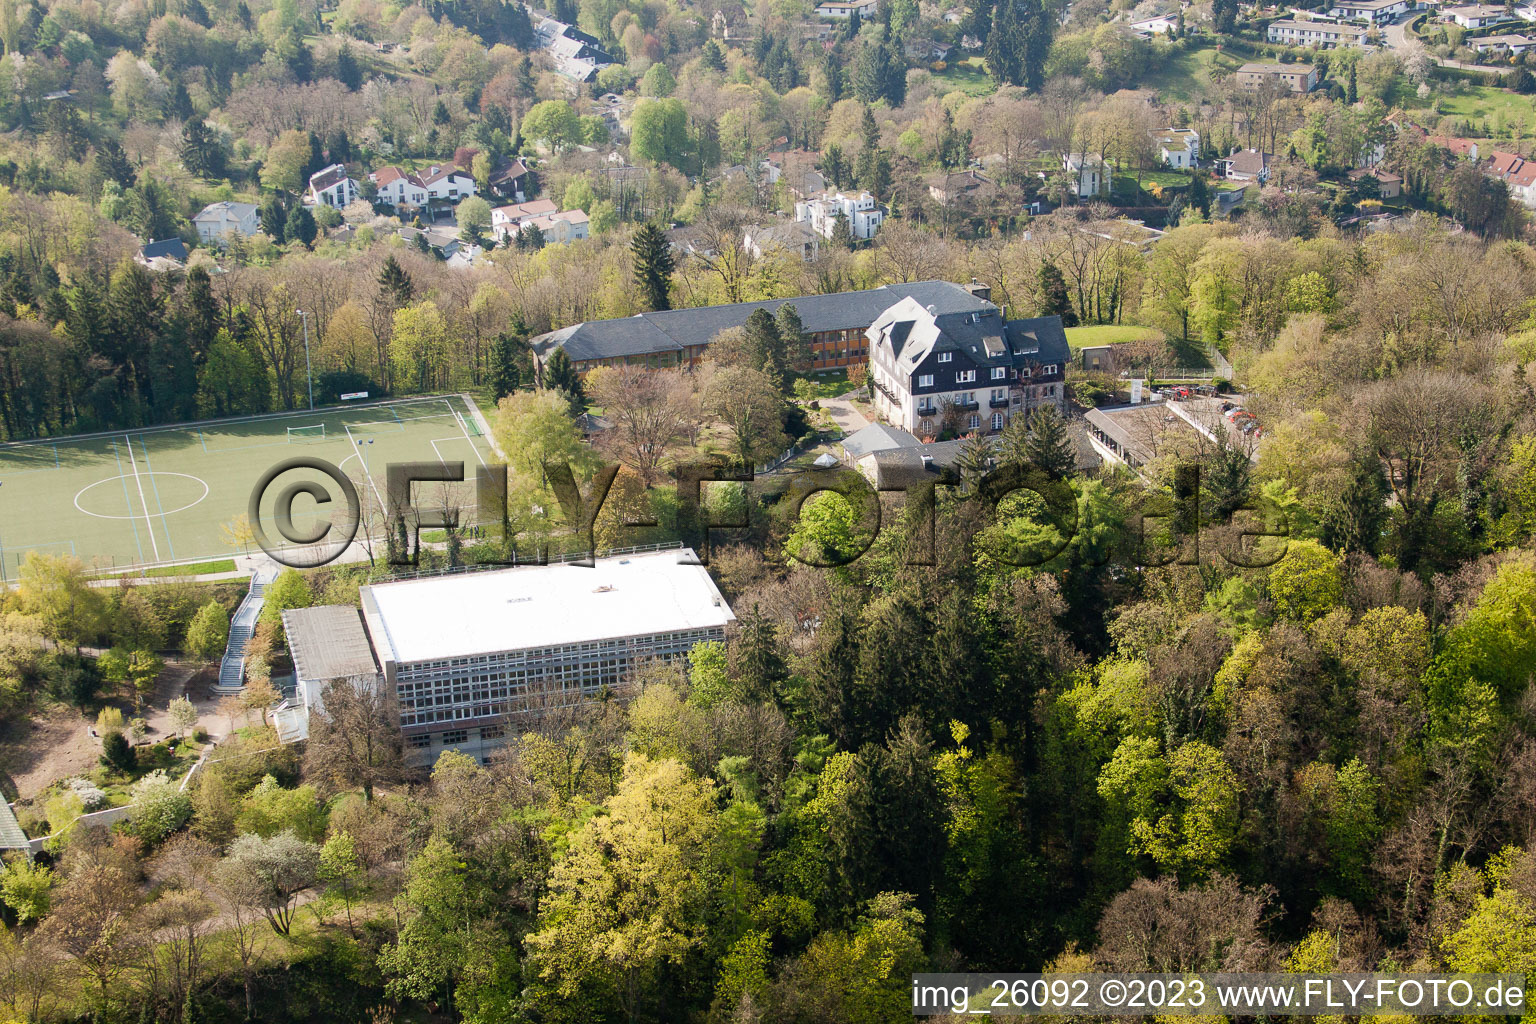 Schöneck sports school behind the Turmberg in the district Durlach in Karlsruhe in the state Baden-Wuerttemberg, Germany from the plane